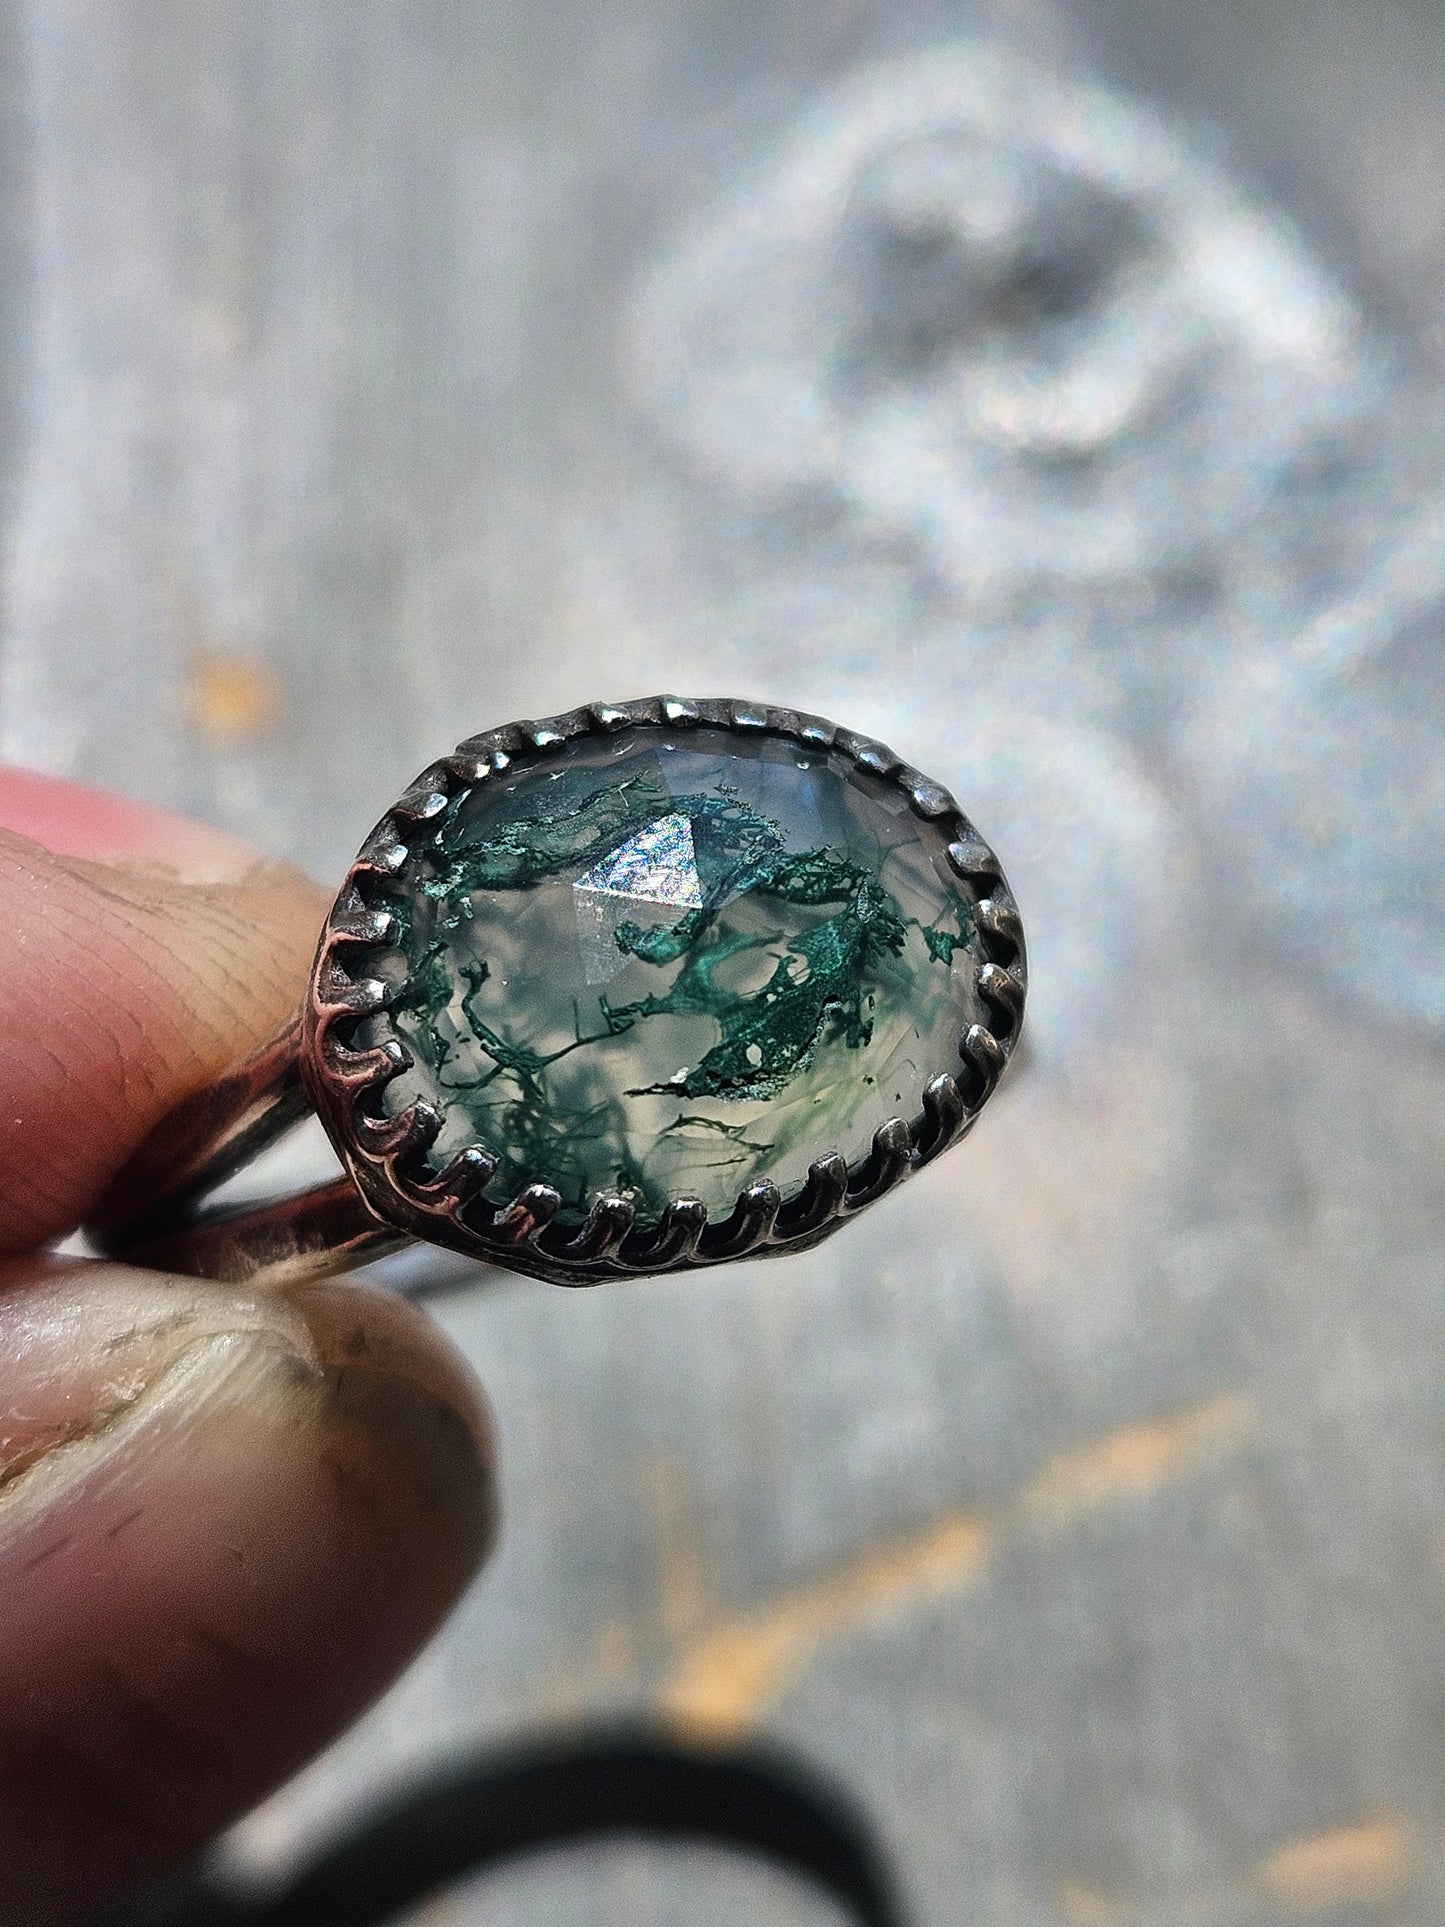 Moss Agate ring, Size 7